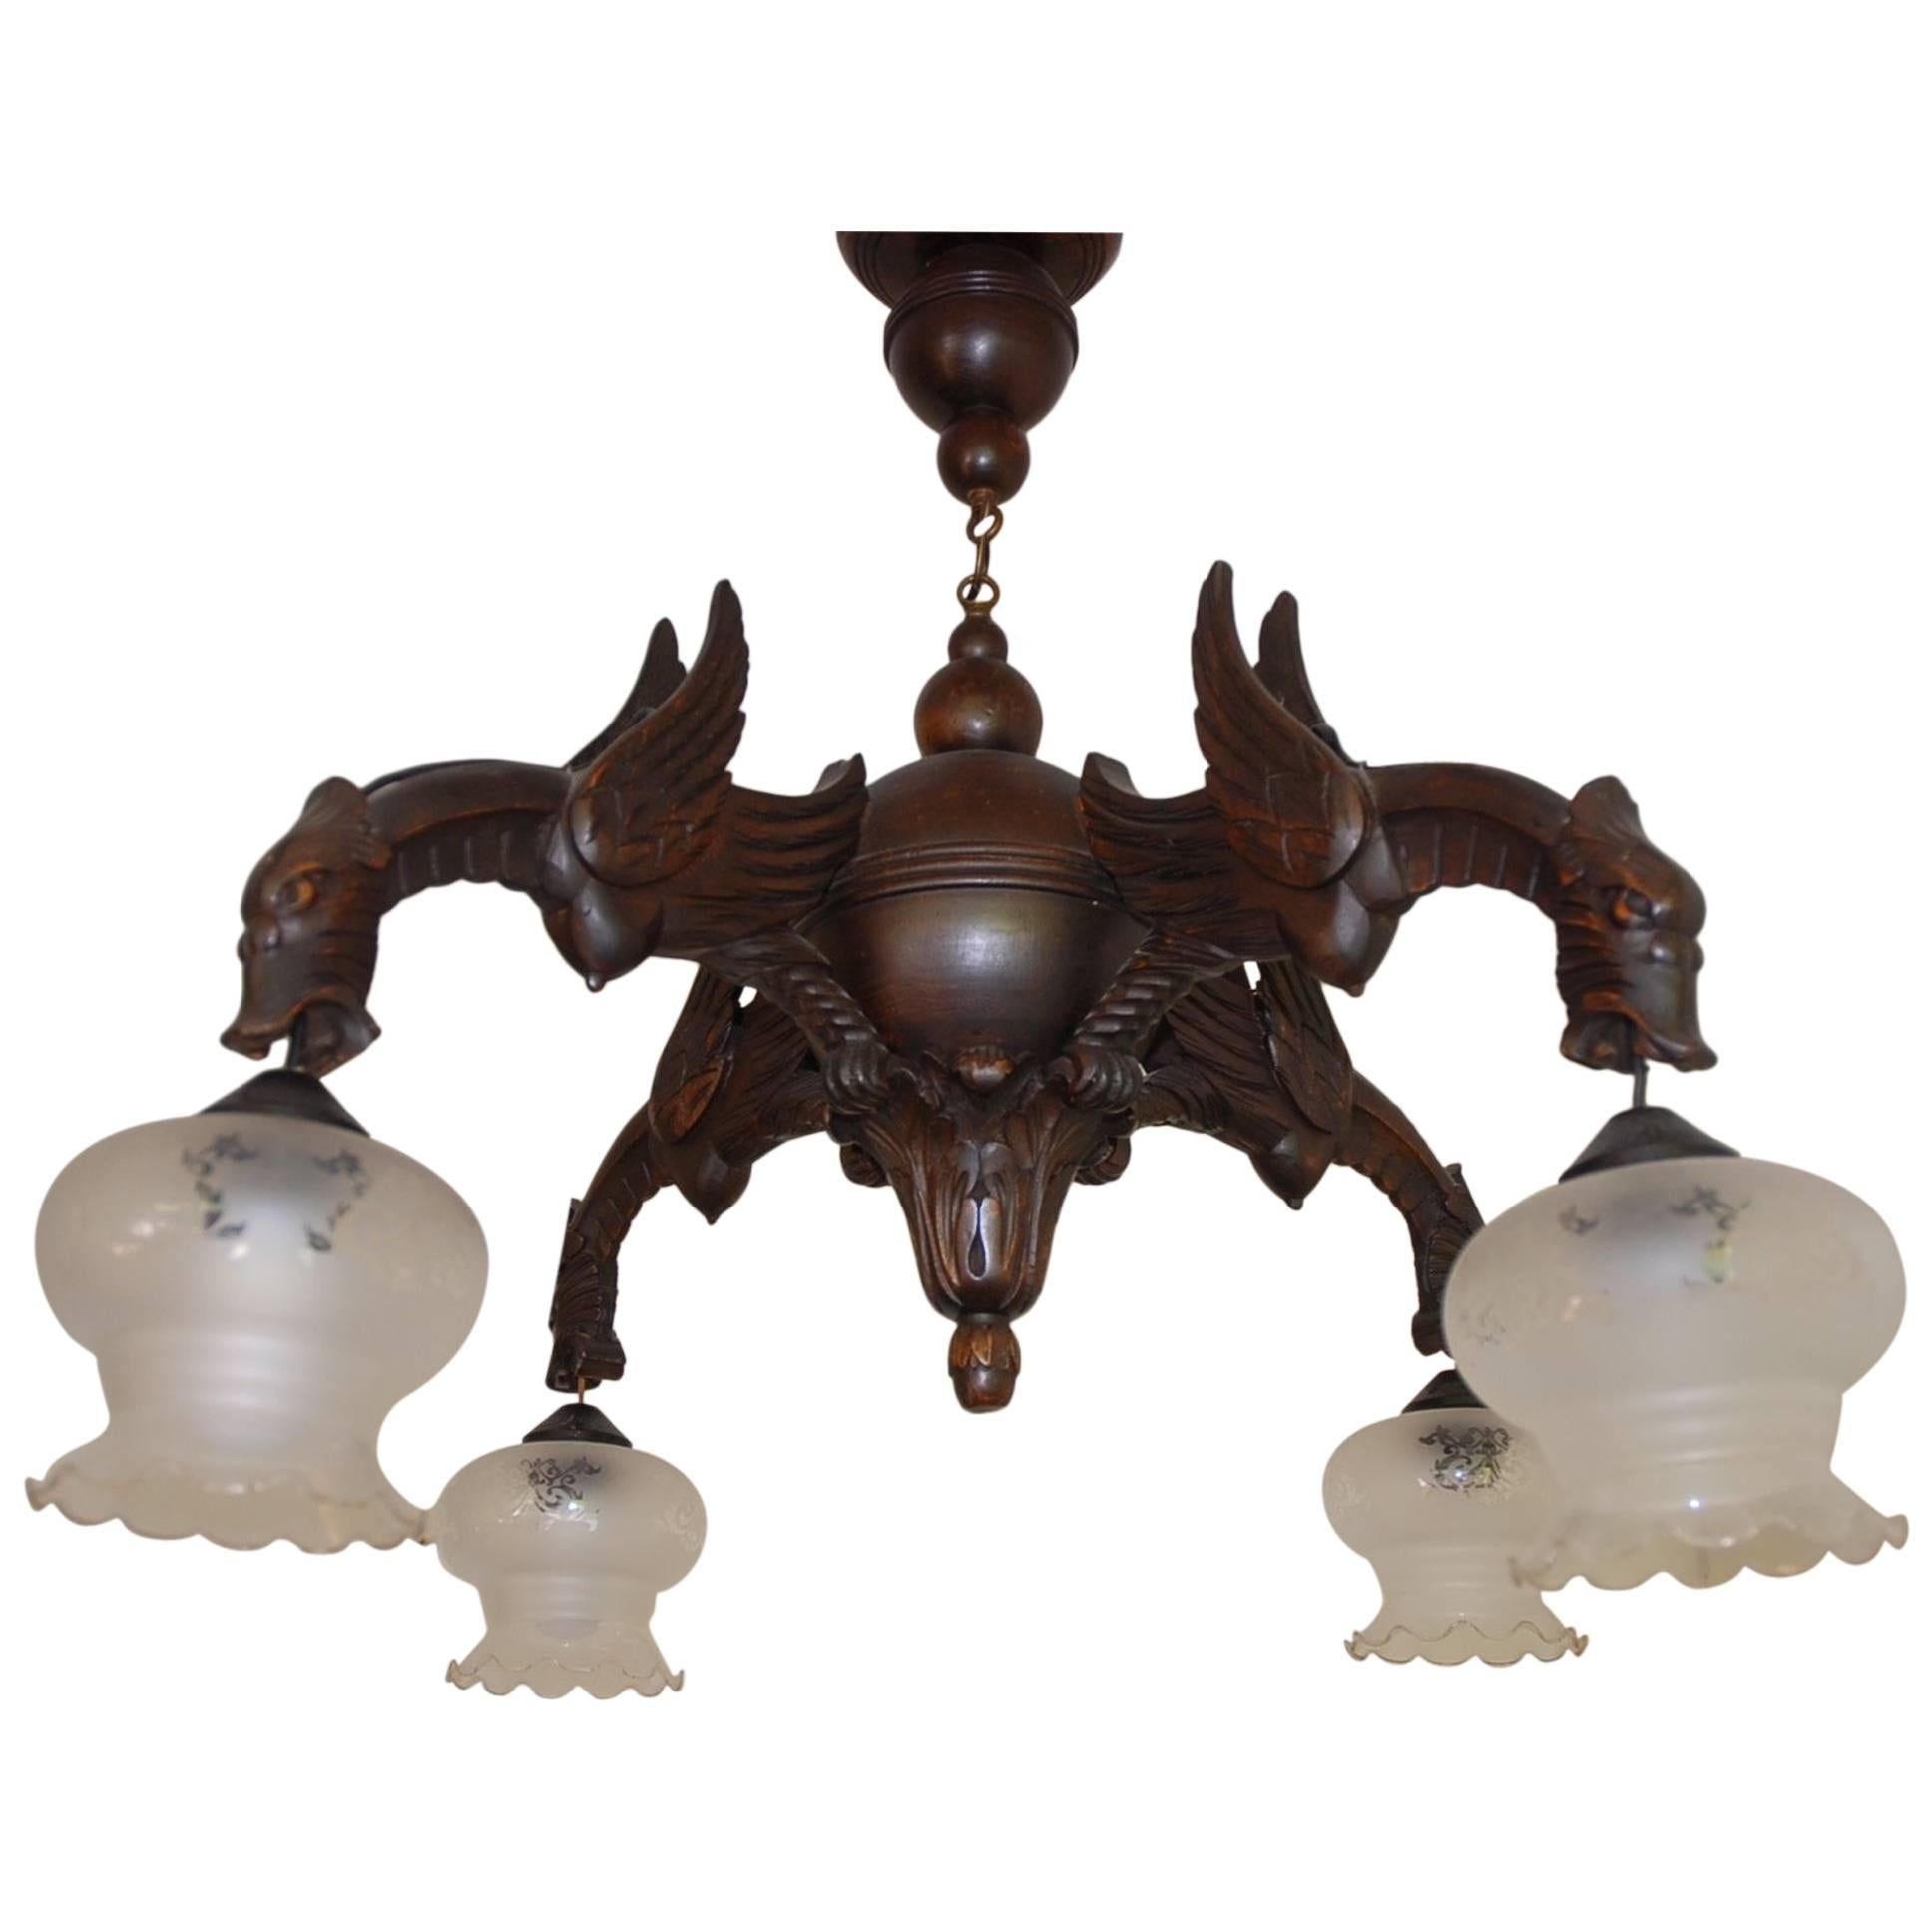 Eraly 1900 Handcrafted Gothic Art Four Arm Winged Dragon Pendant Light